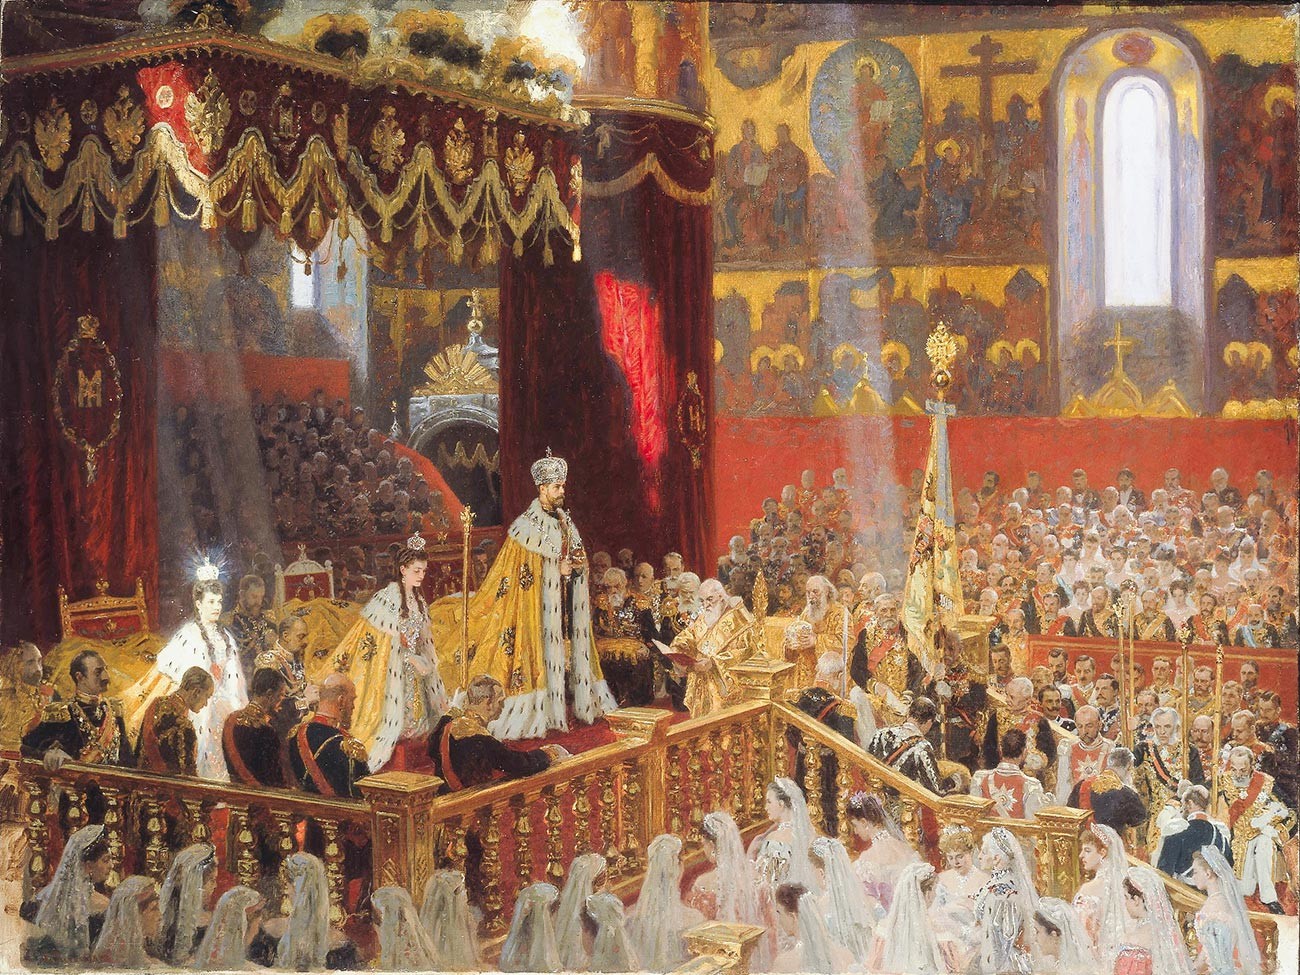 The coronation of Nicholas II in the Dormition Cathedral of the Moscow Kremlin.